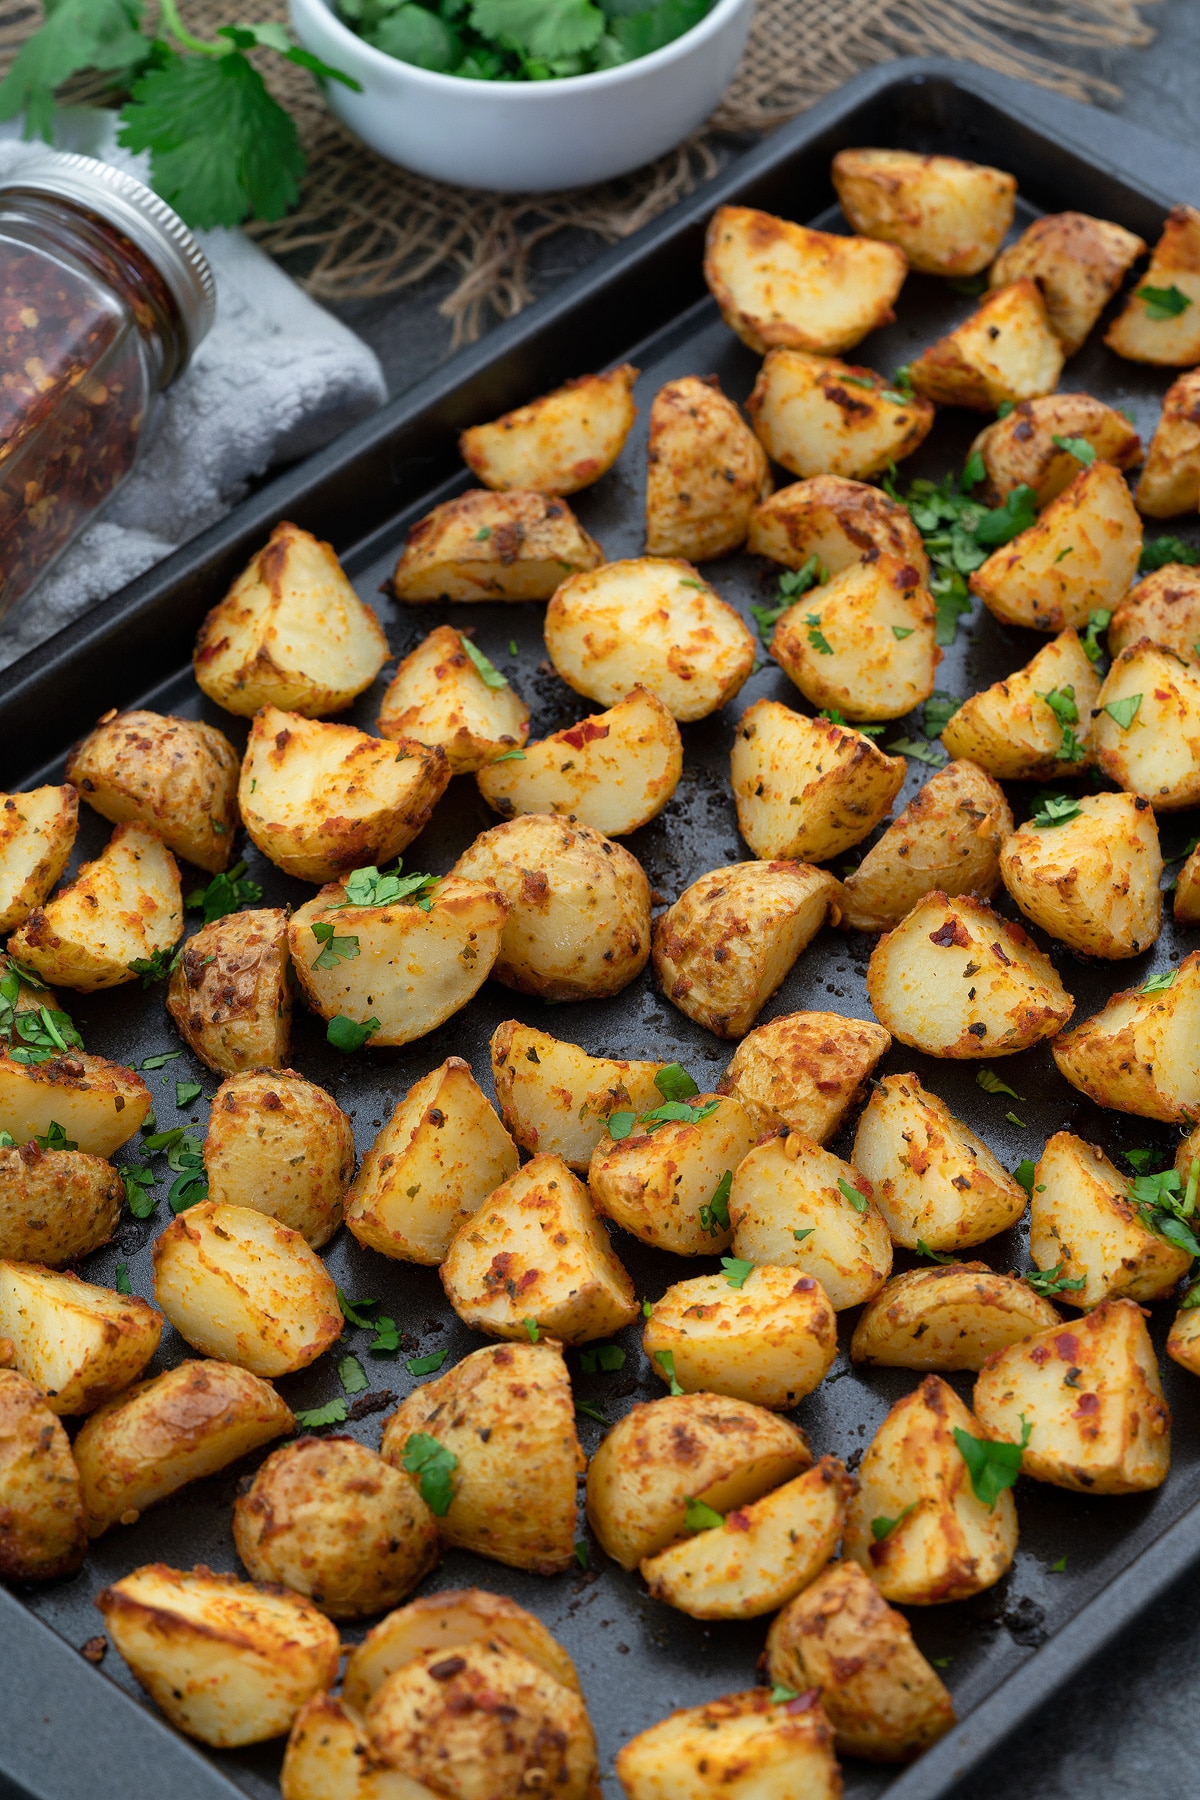 Roasted Potatoes in a baking tray